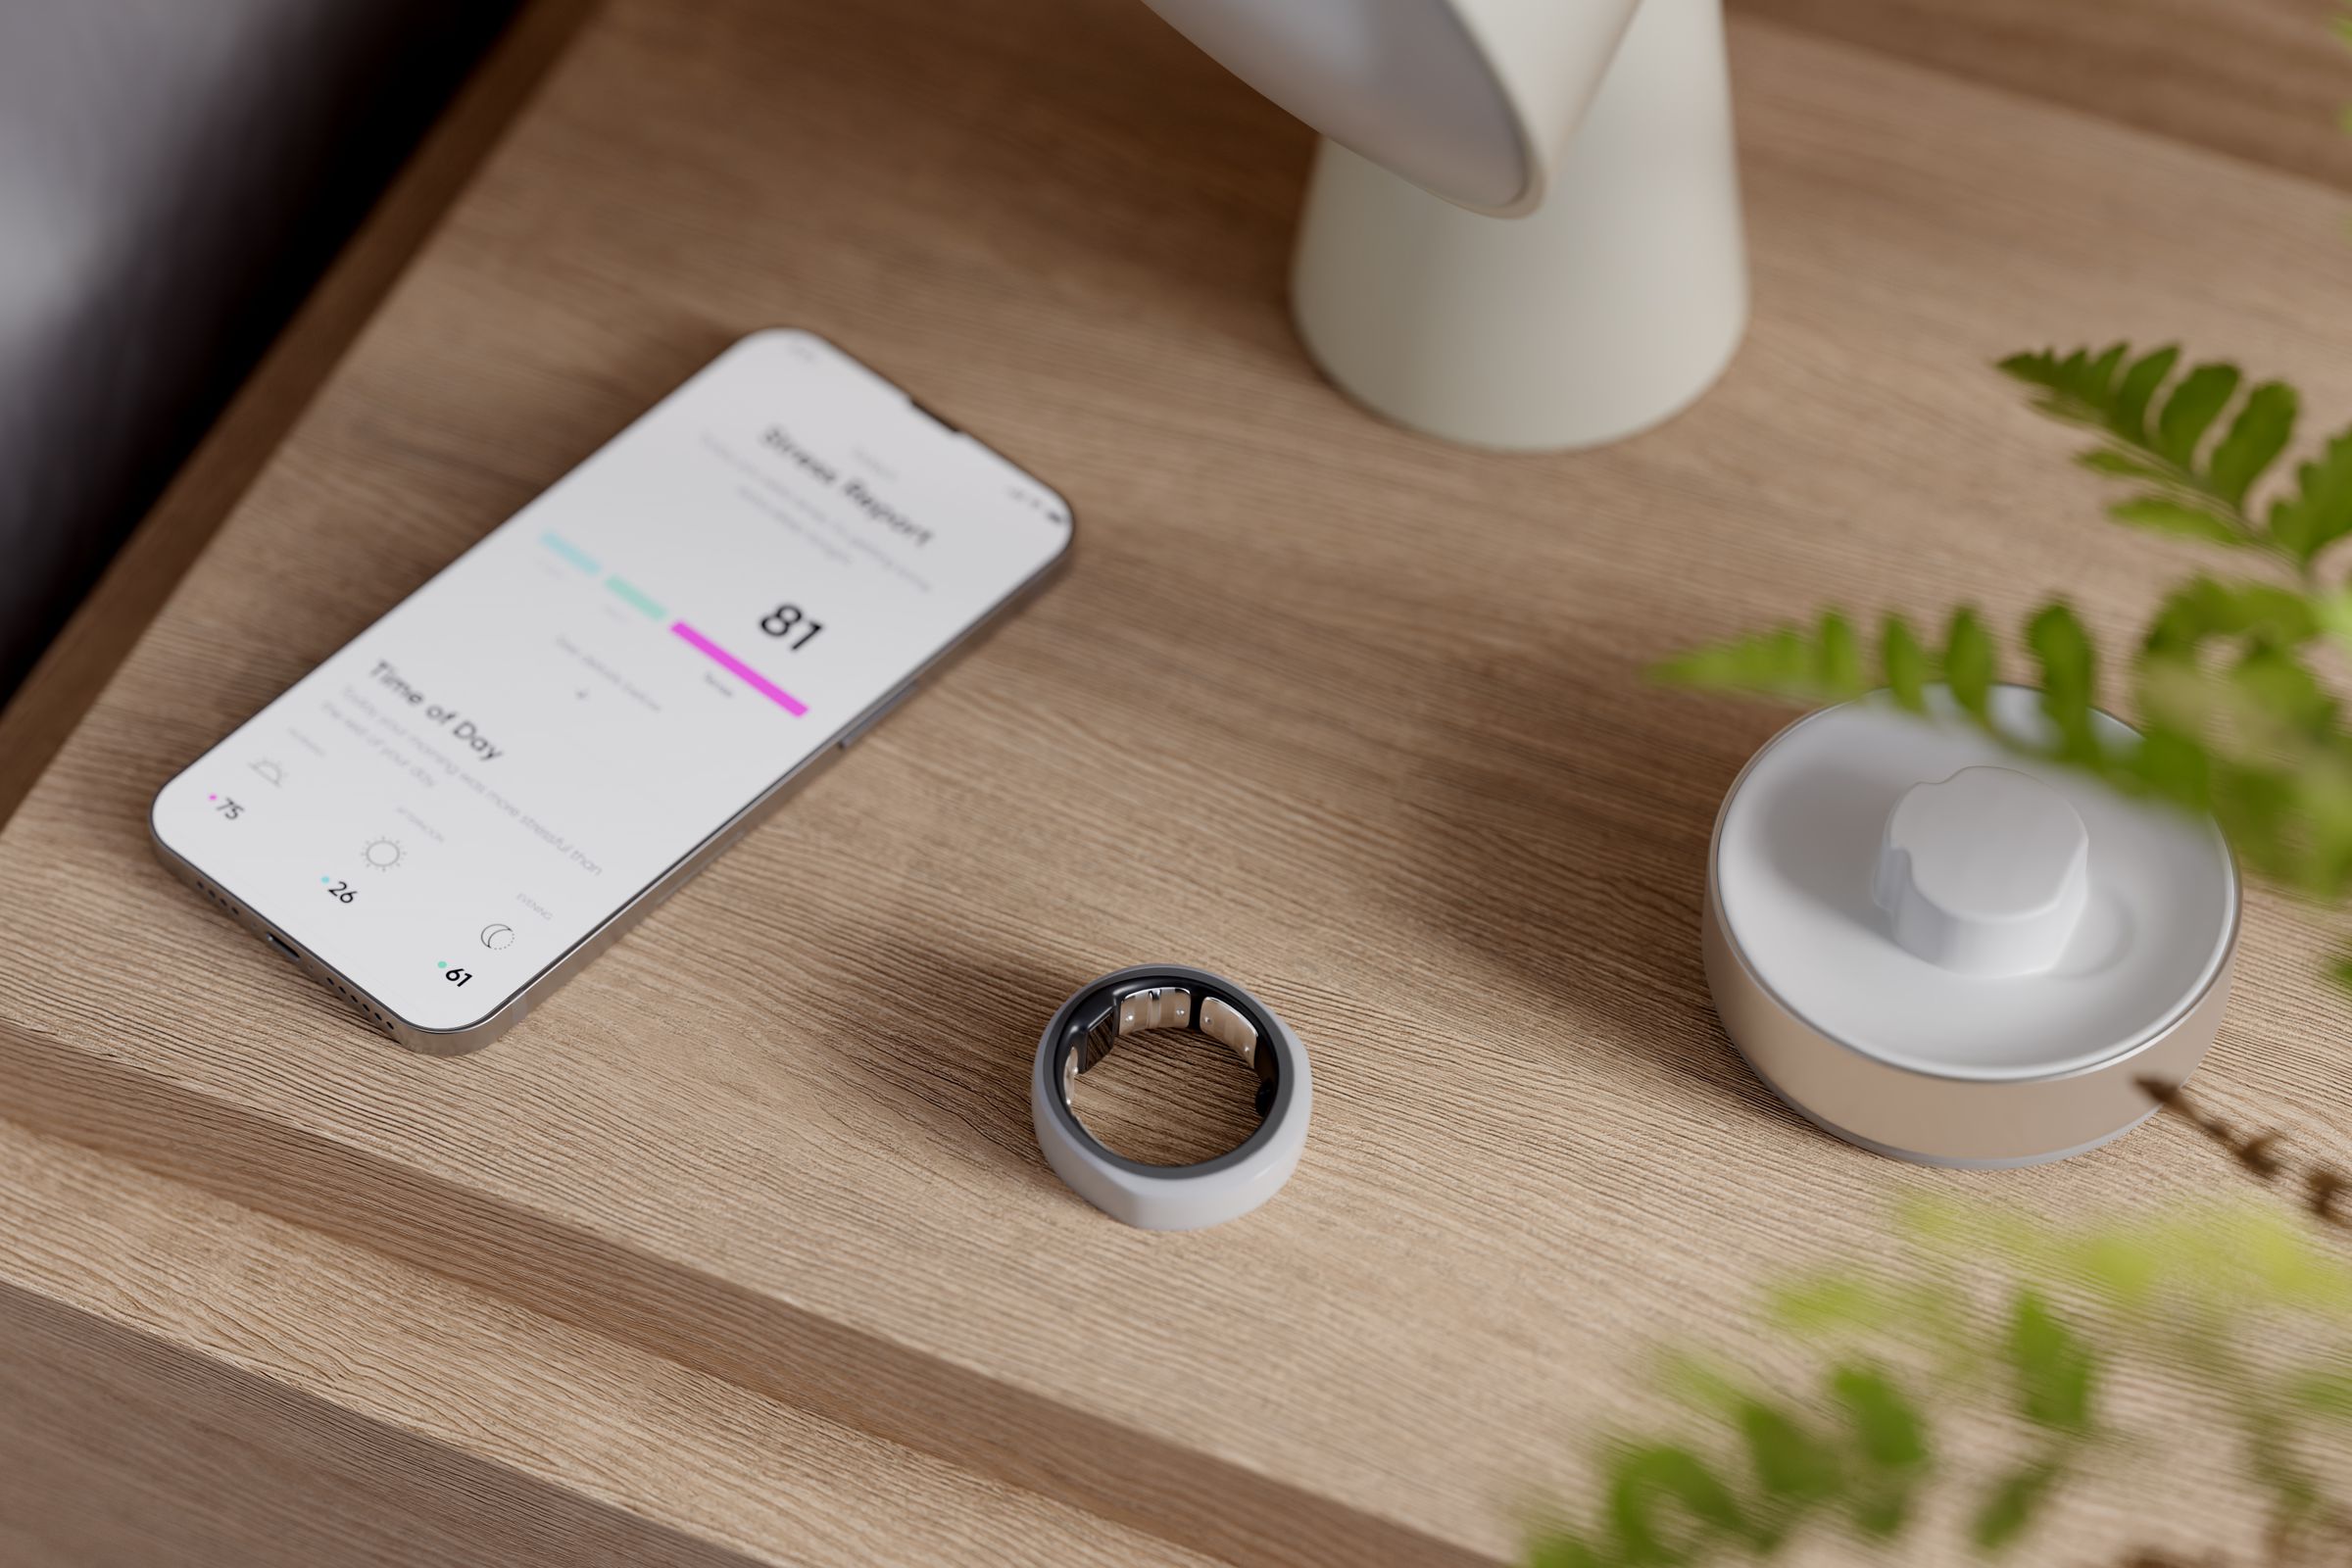 Gray smart ring on a table with a phone